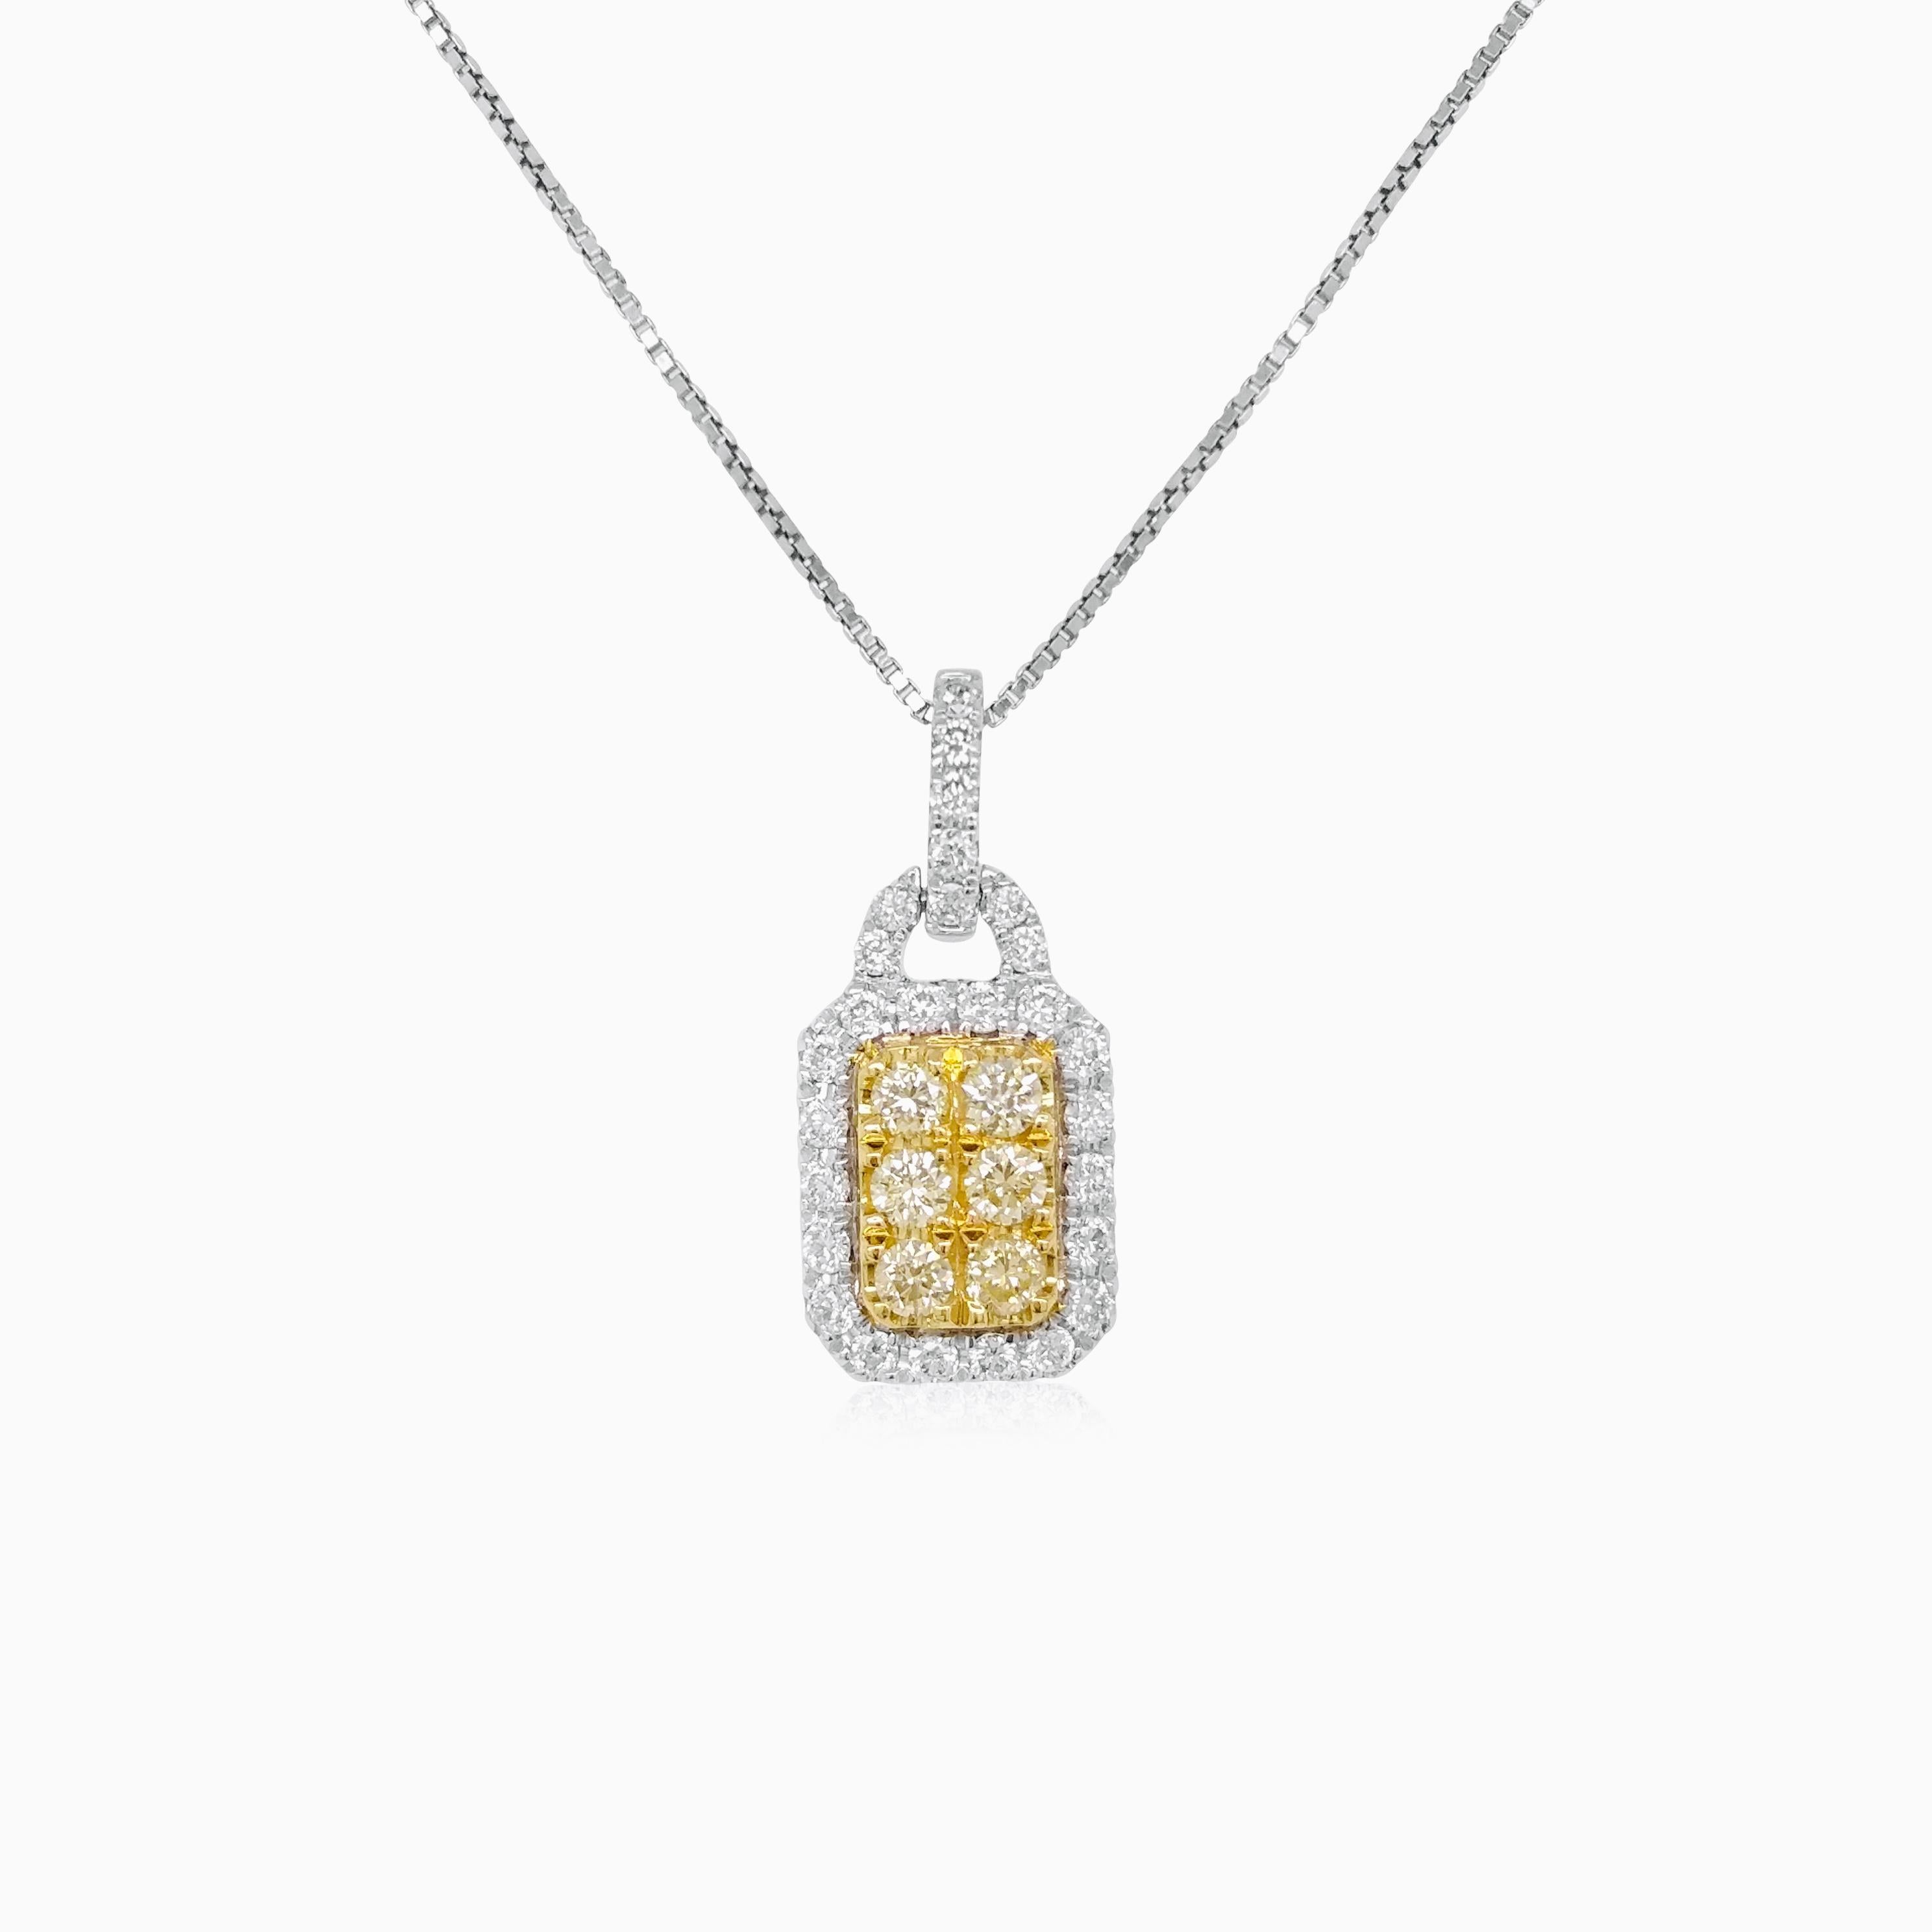 Pendant Necklace made with Natural yellow Diamonds and White diamonds, set in Gold. A classic piece with a charming look.

Yellow Diamonds- 0.14 cts
White Diamonds- 0.17 cts


HYT Jewelry is a privately owned company headquartered in Hong Kong, with